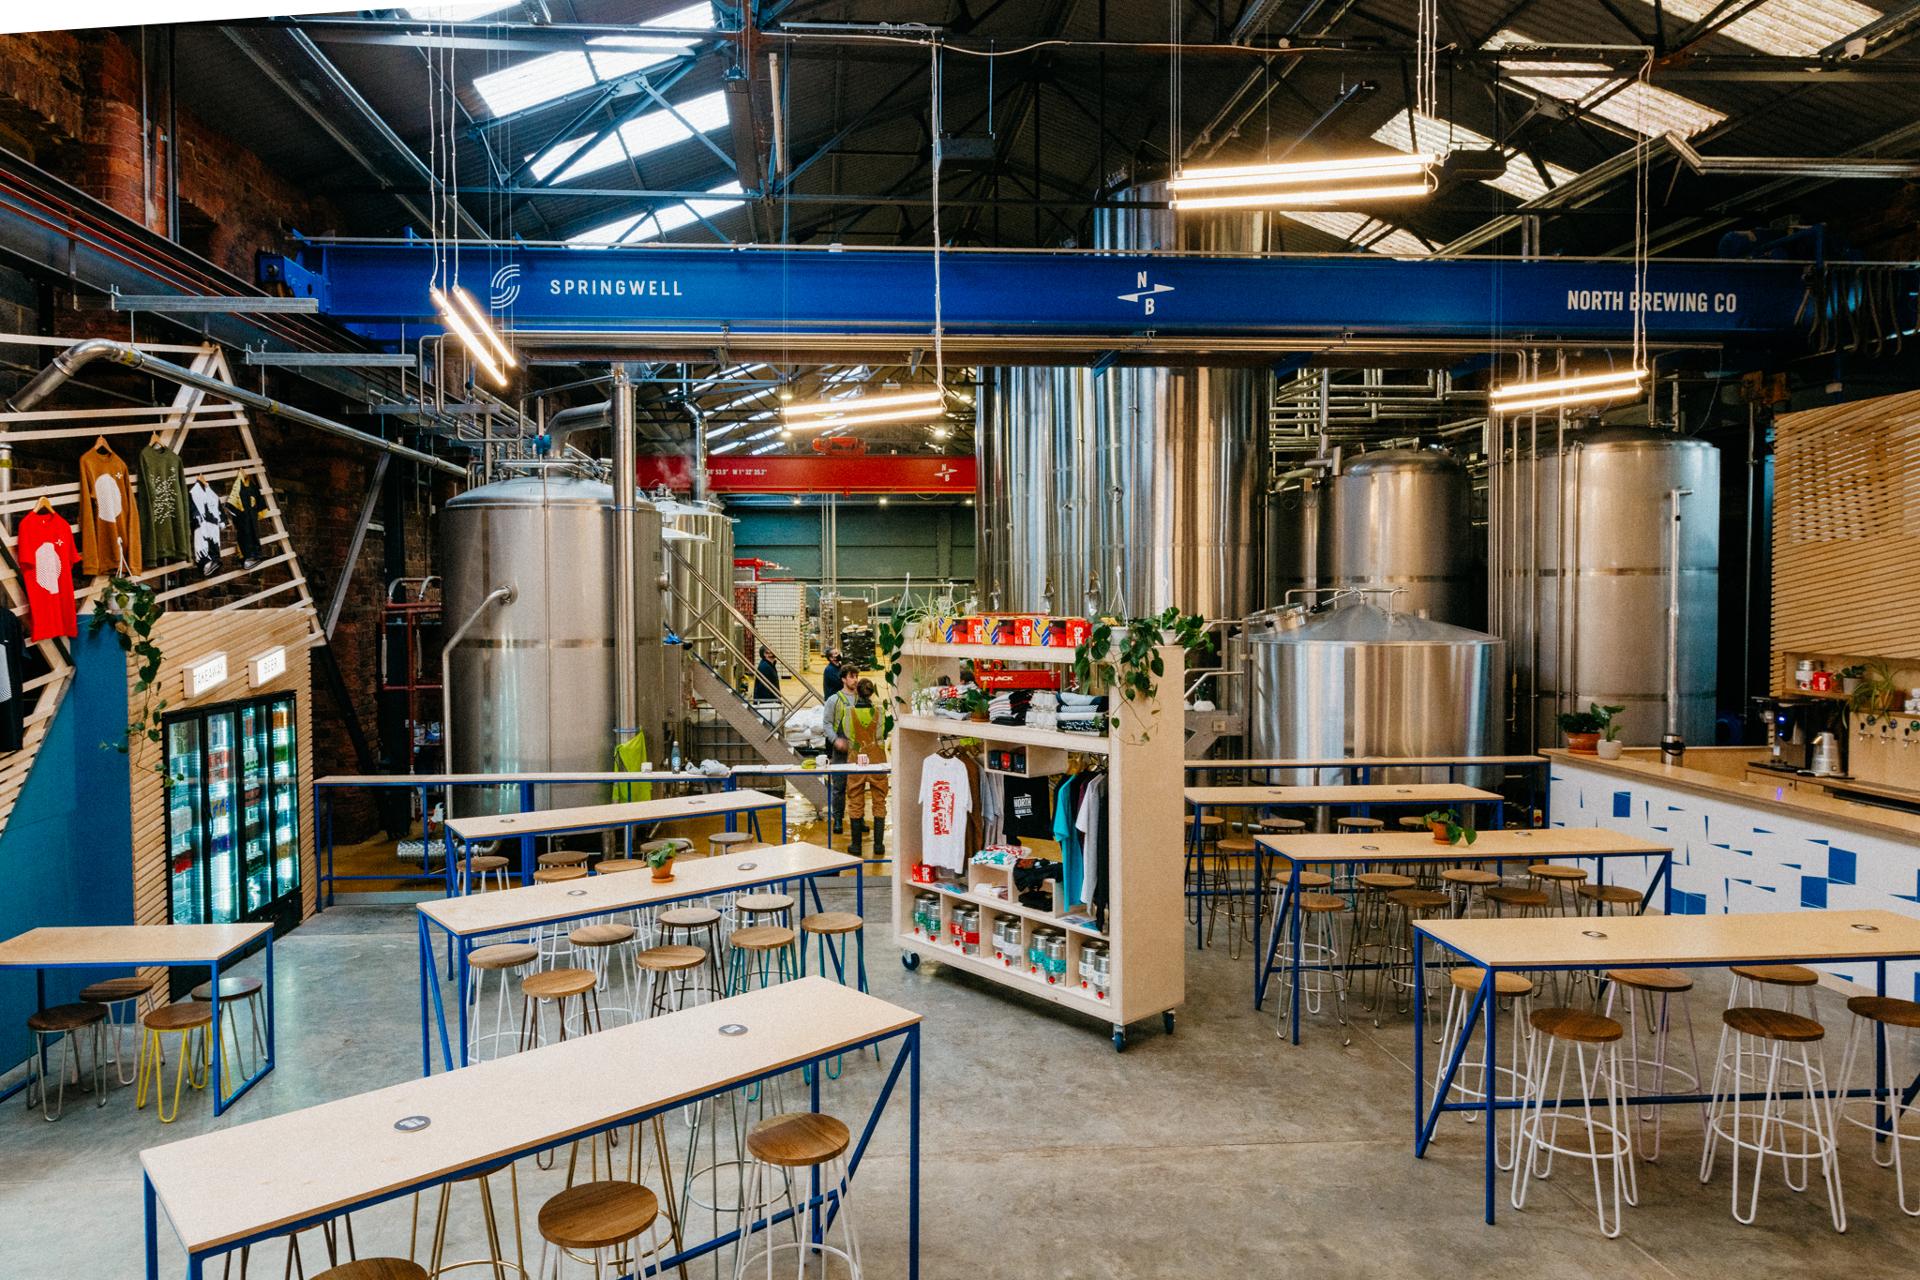 Leeds-based brewery set to appoint administrators